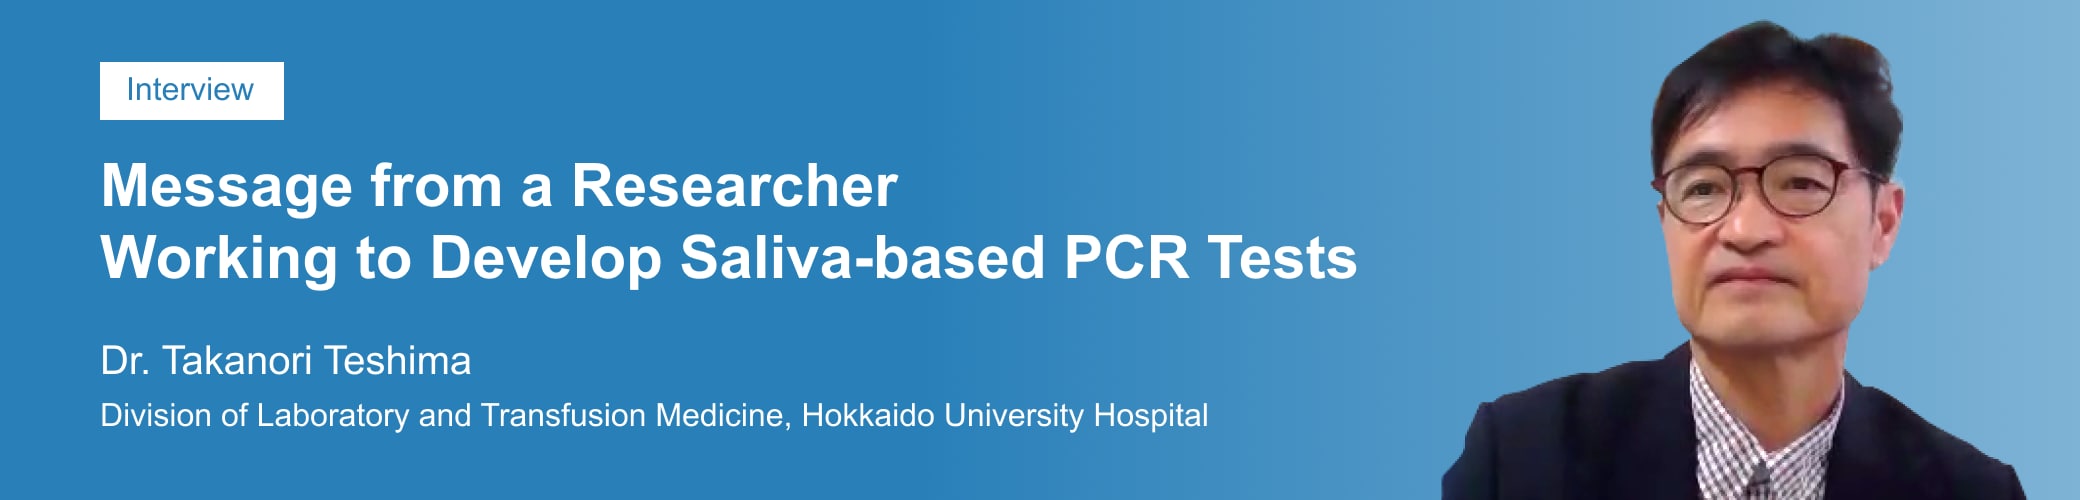 Developing a Saliva-based PCR Test Method: A Key to Preventing the Spread of Infection Takanori Teshima, MD, PhD  Division of Laboratory and Transfusion Medicine, Hokkaido University Hospital, Japan